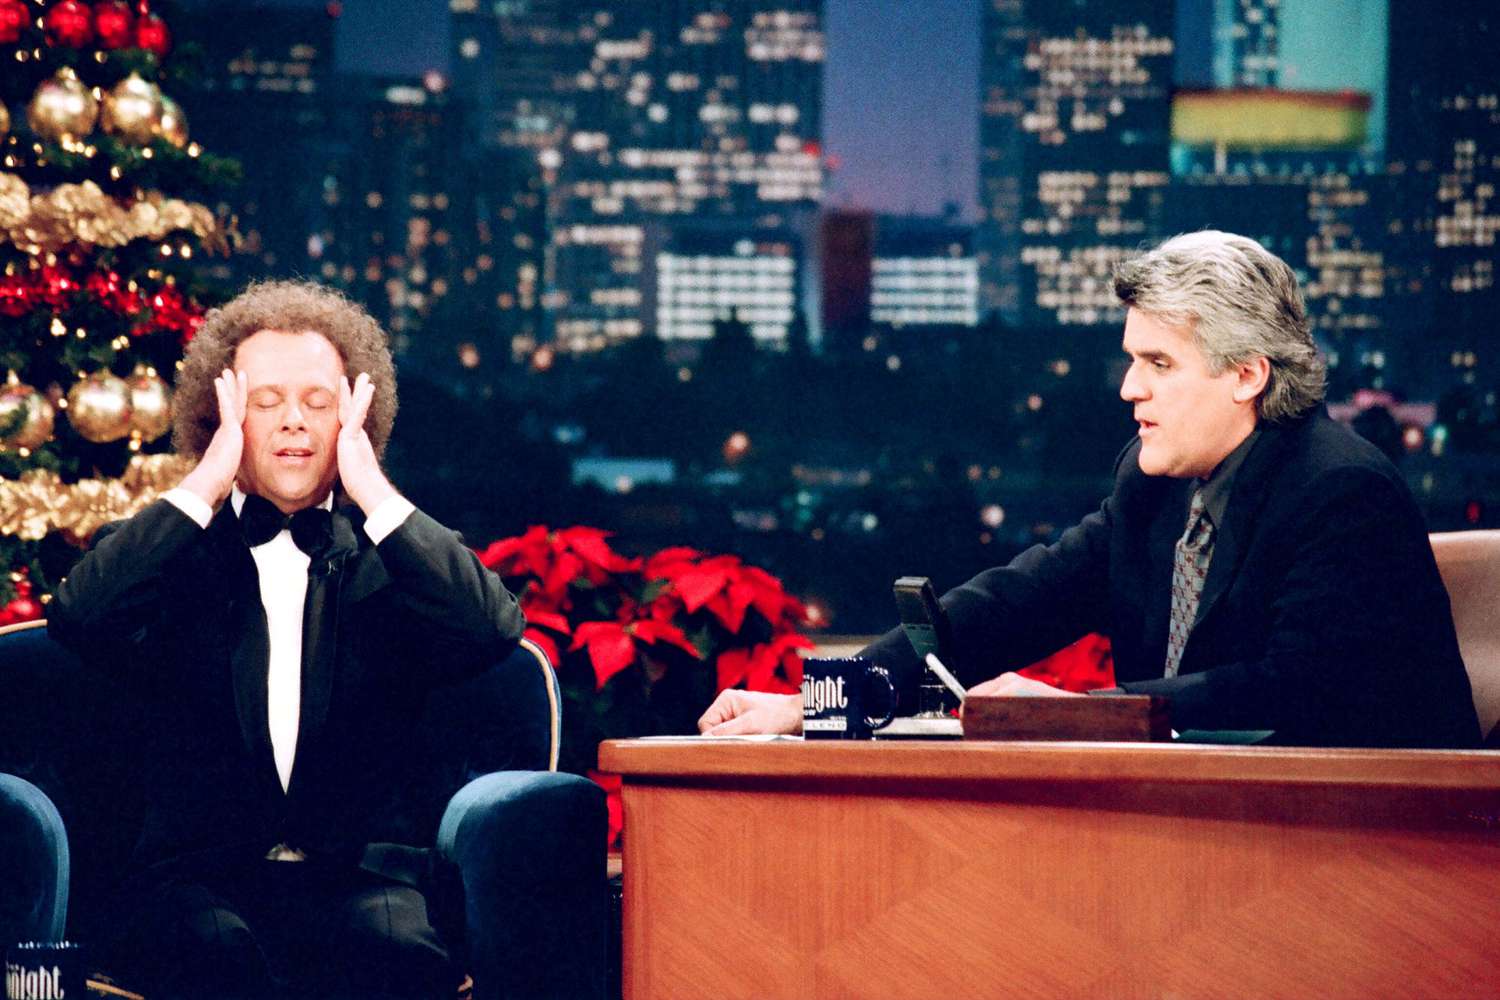 Richard Simmons on The Tonight Show With Jay Leno on Dec. 17, 1997